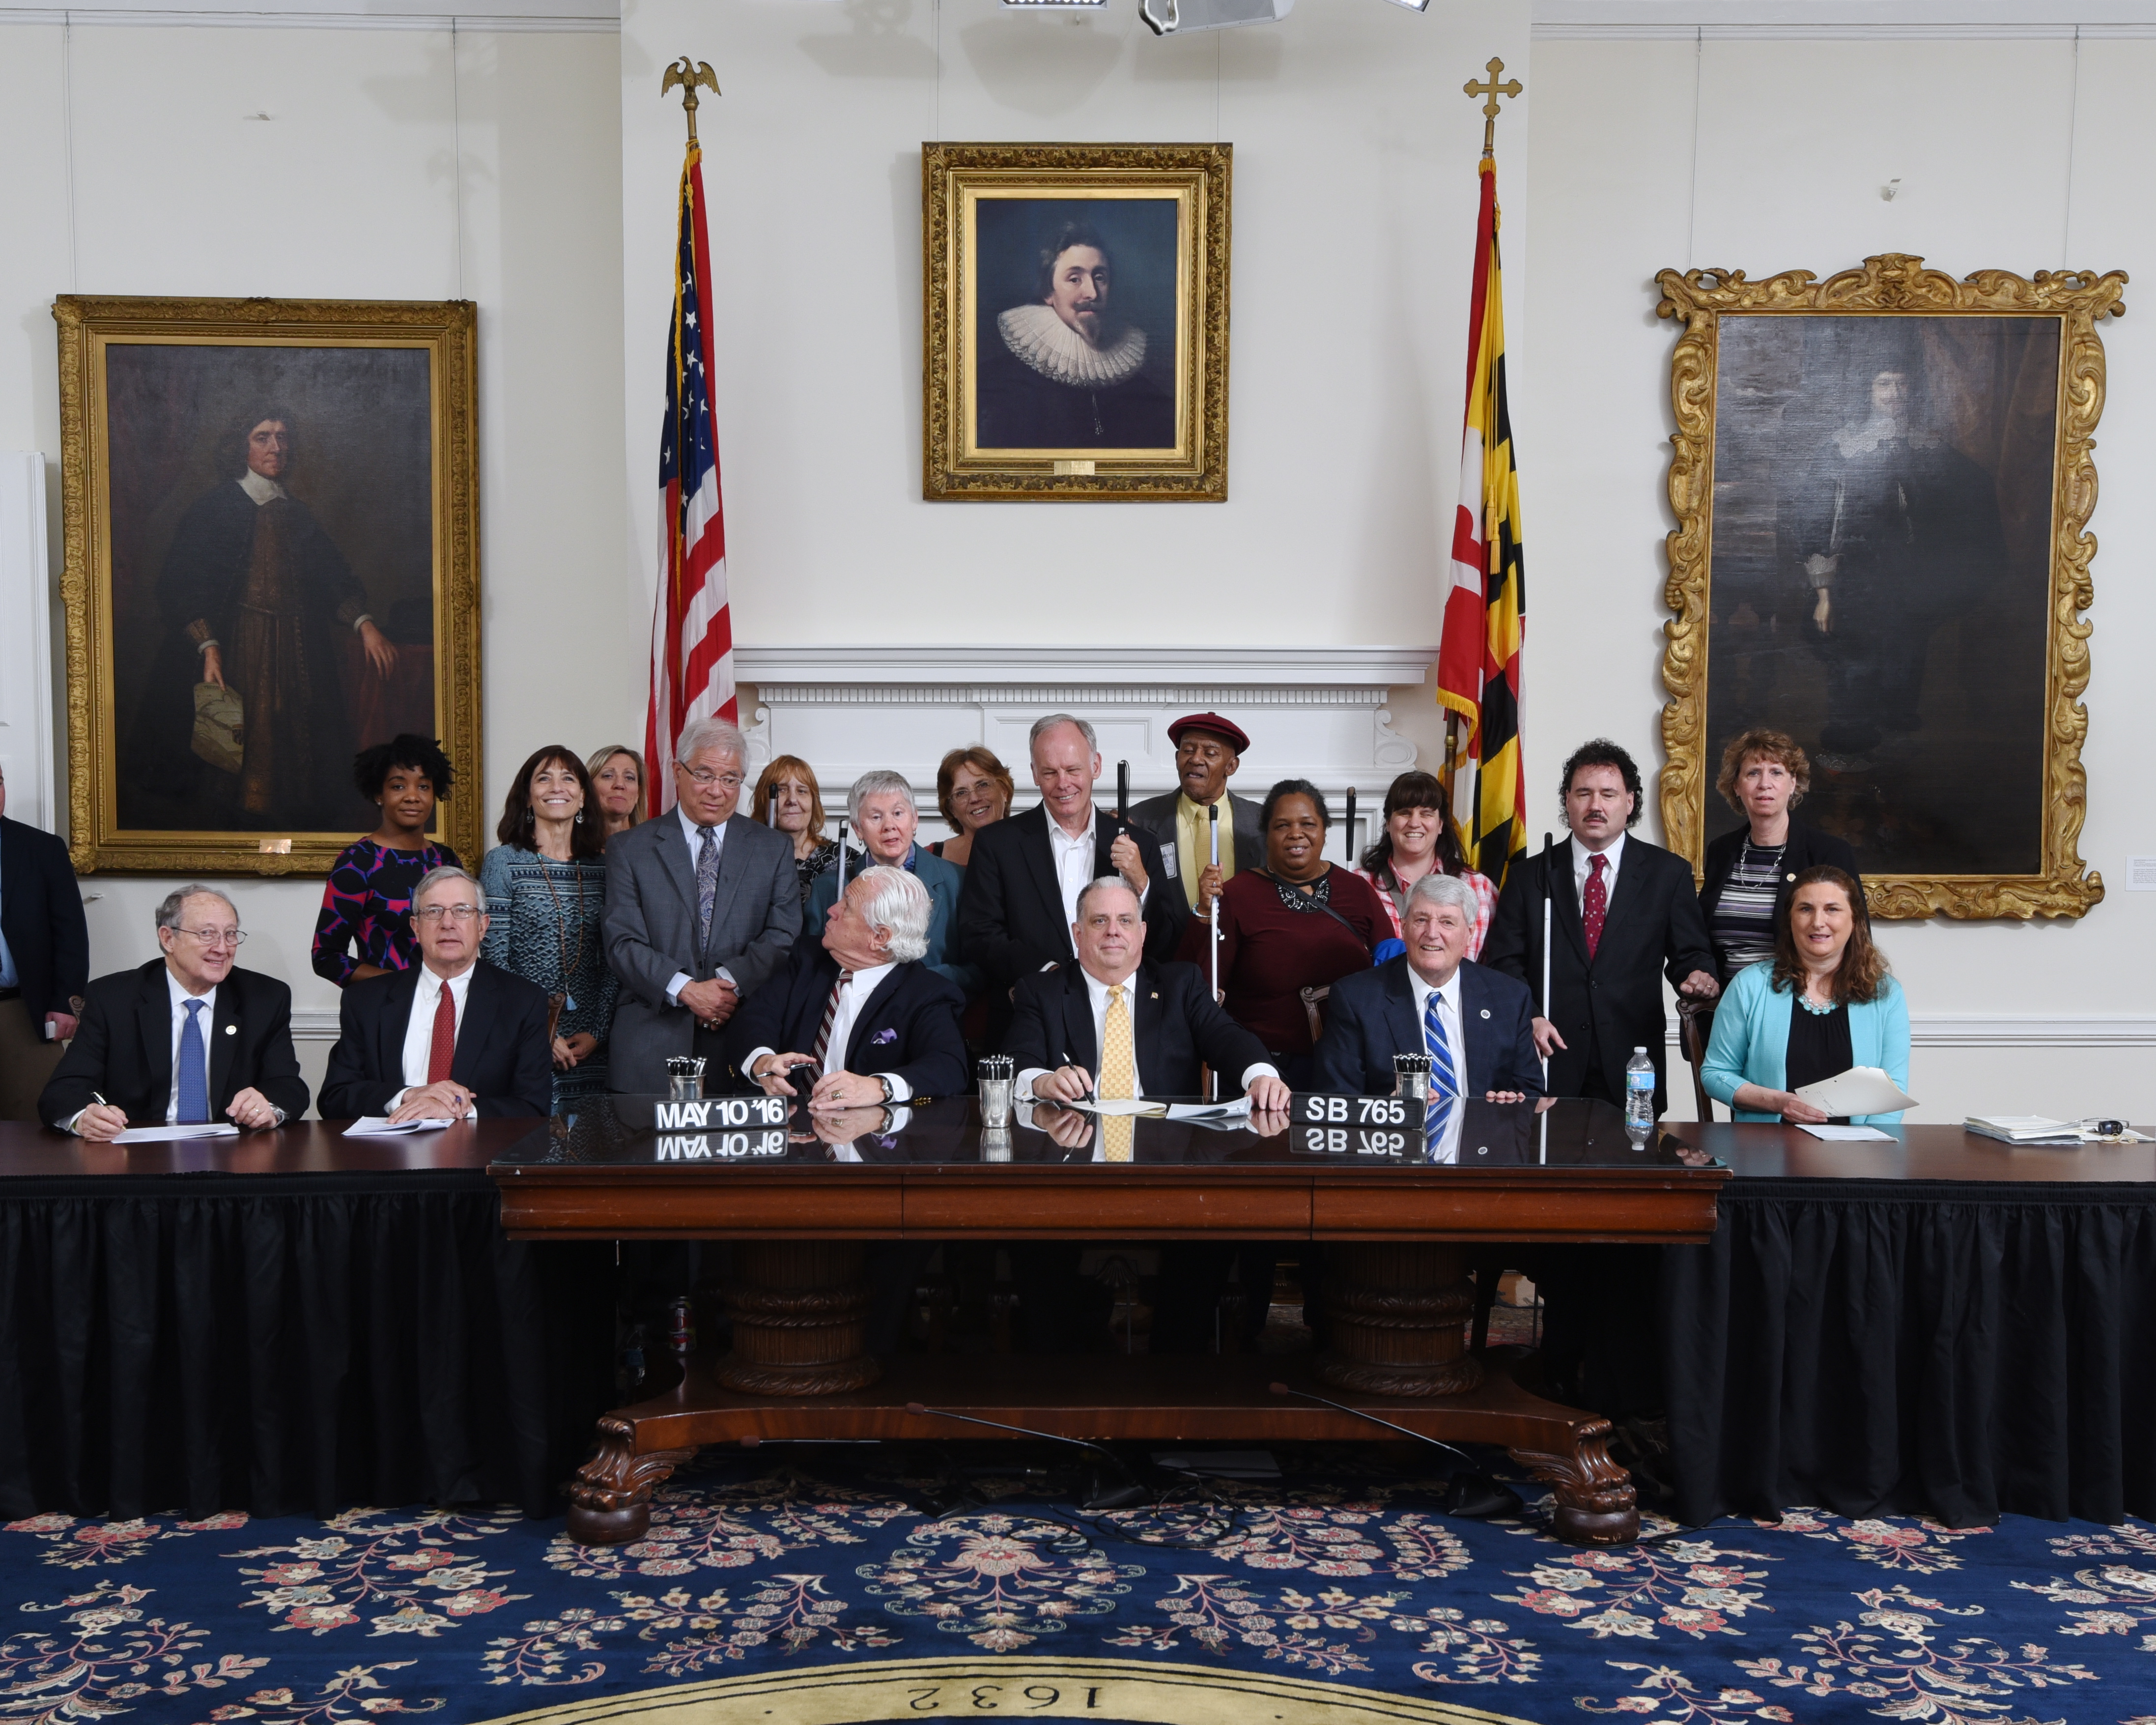 On May 10, 2016, Governor Hogan signed SB765 into law. This new law offers greater protection to disabled parents and caregivers in custody, guardianship, and adoption cases.